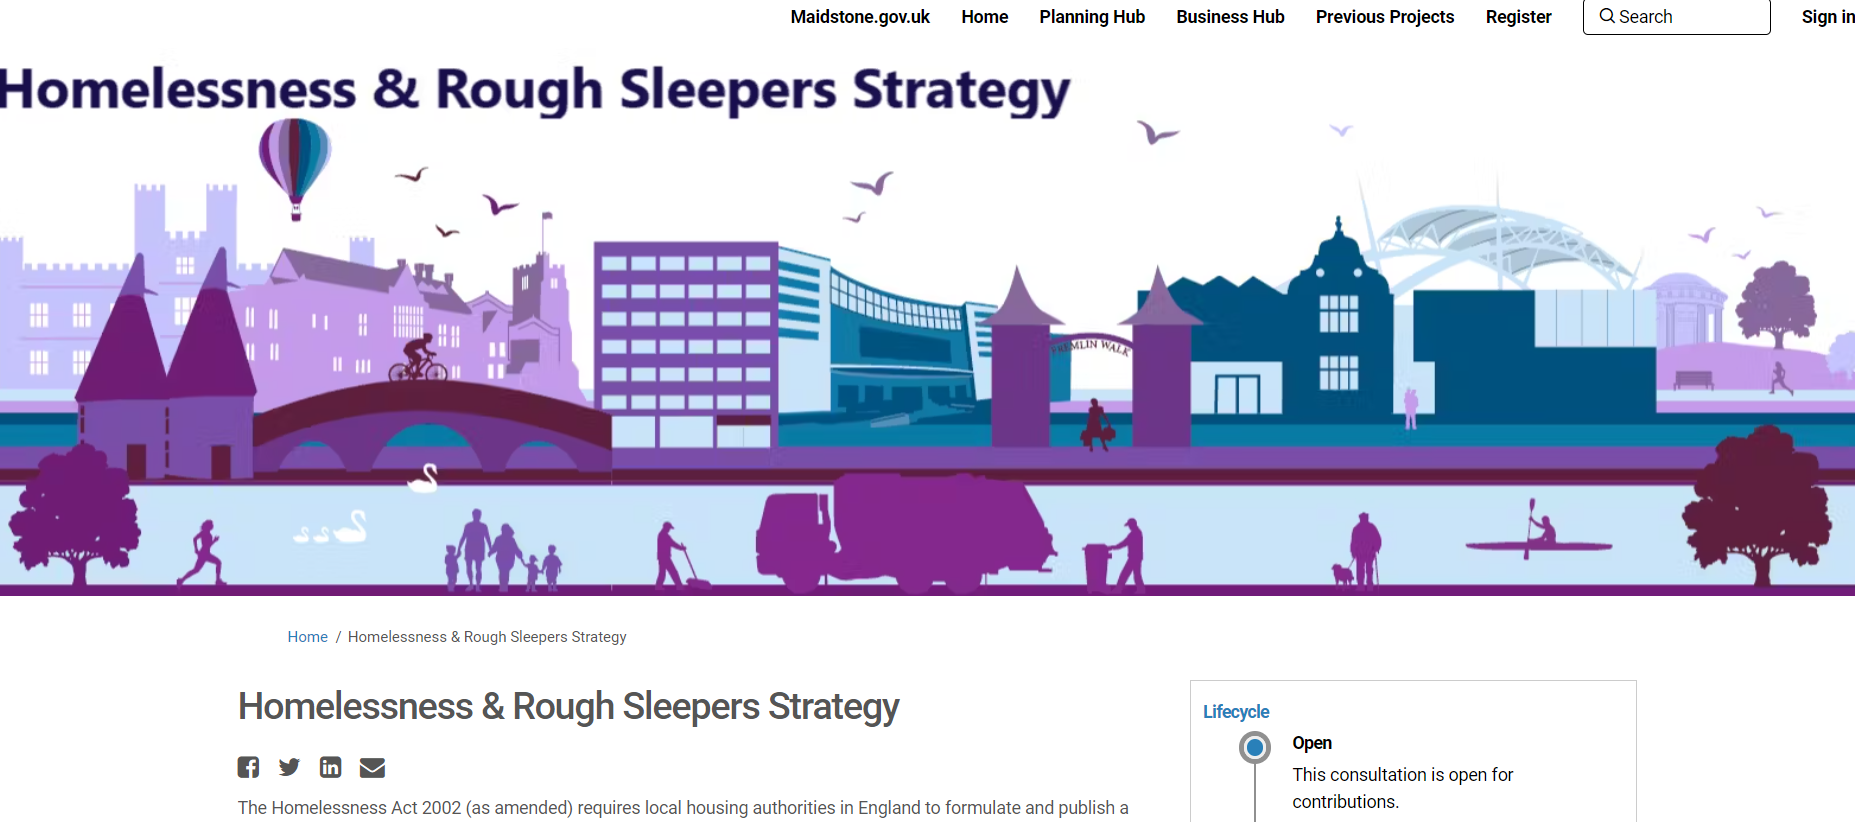 Homelessness and rough sleepers survey   image